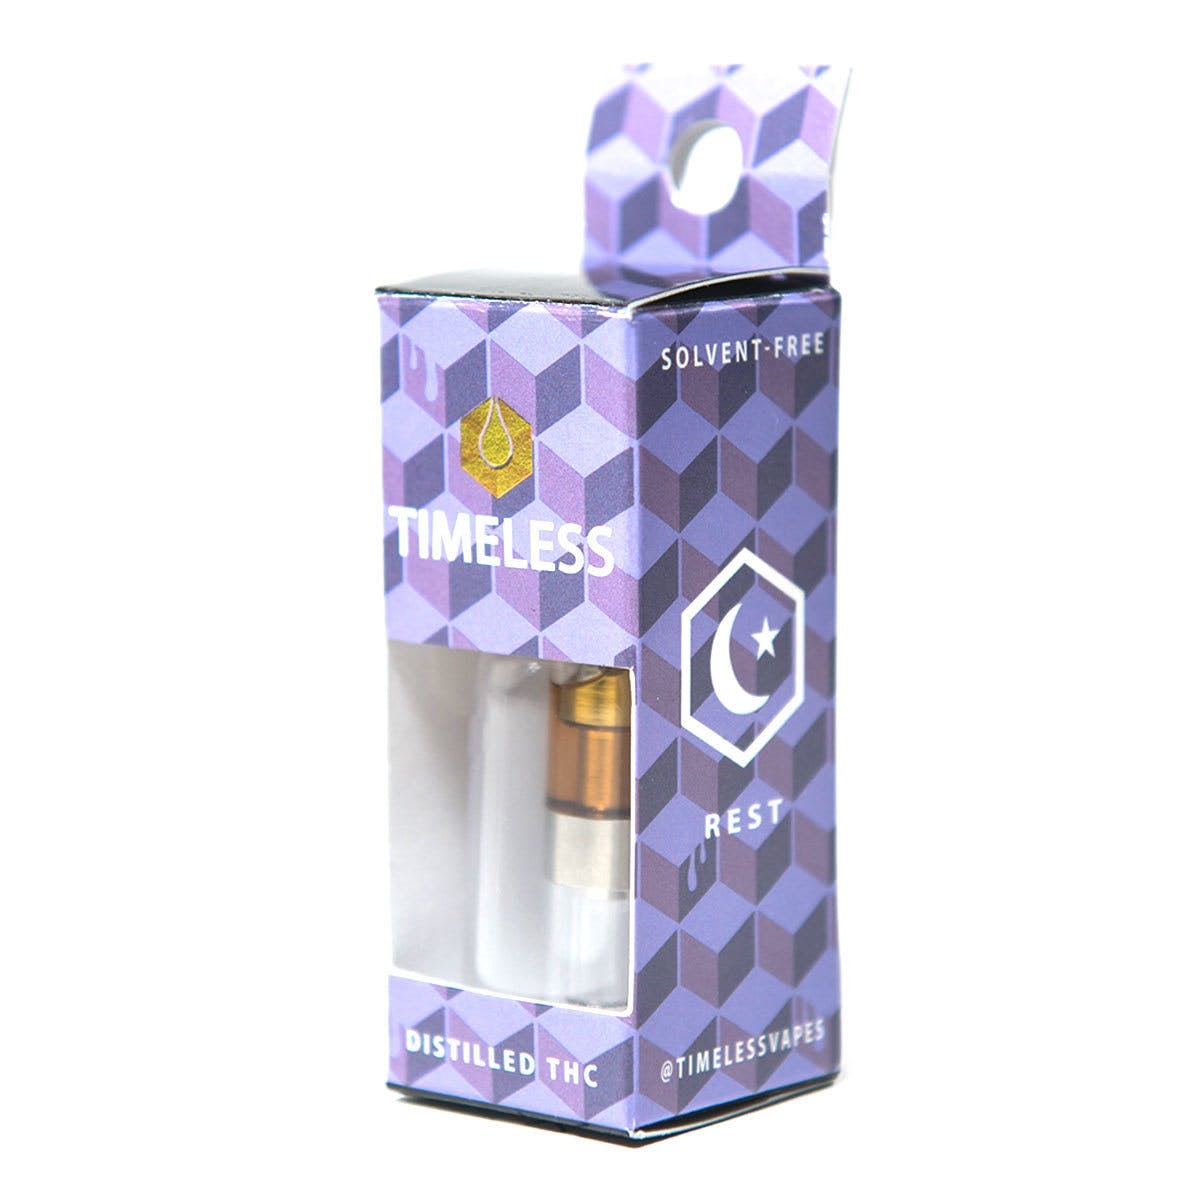 concentrate-timeless-vapes-500mg-grand-daddy-purp-vape-cartridge-rest